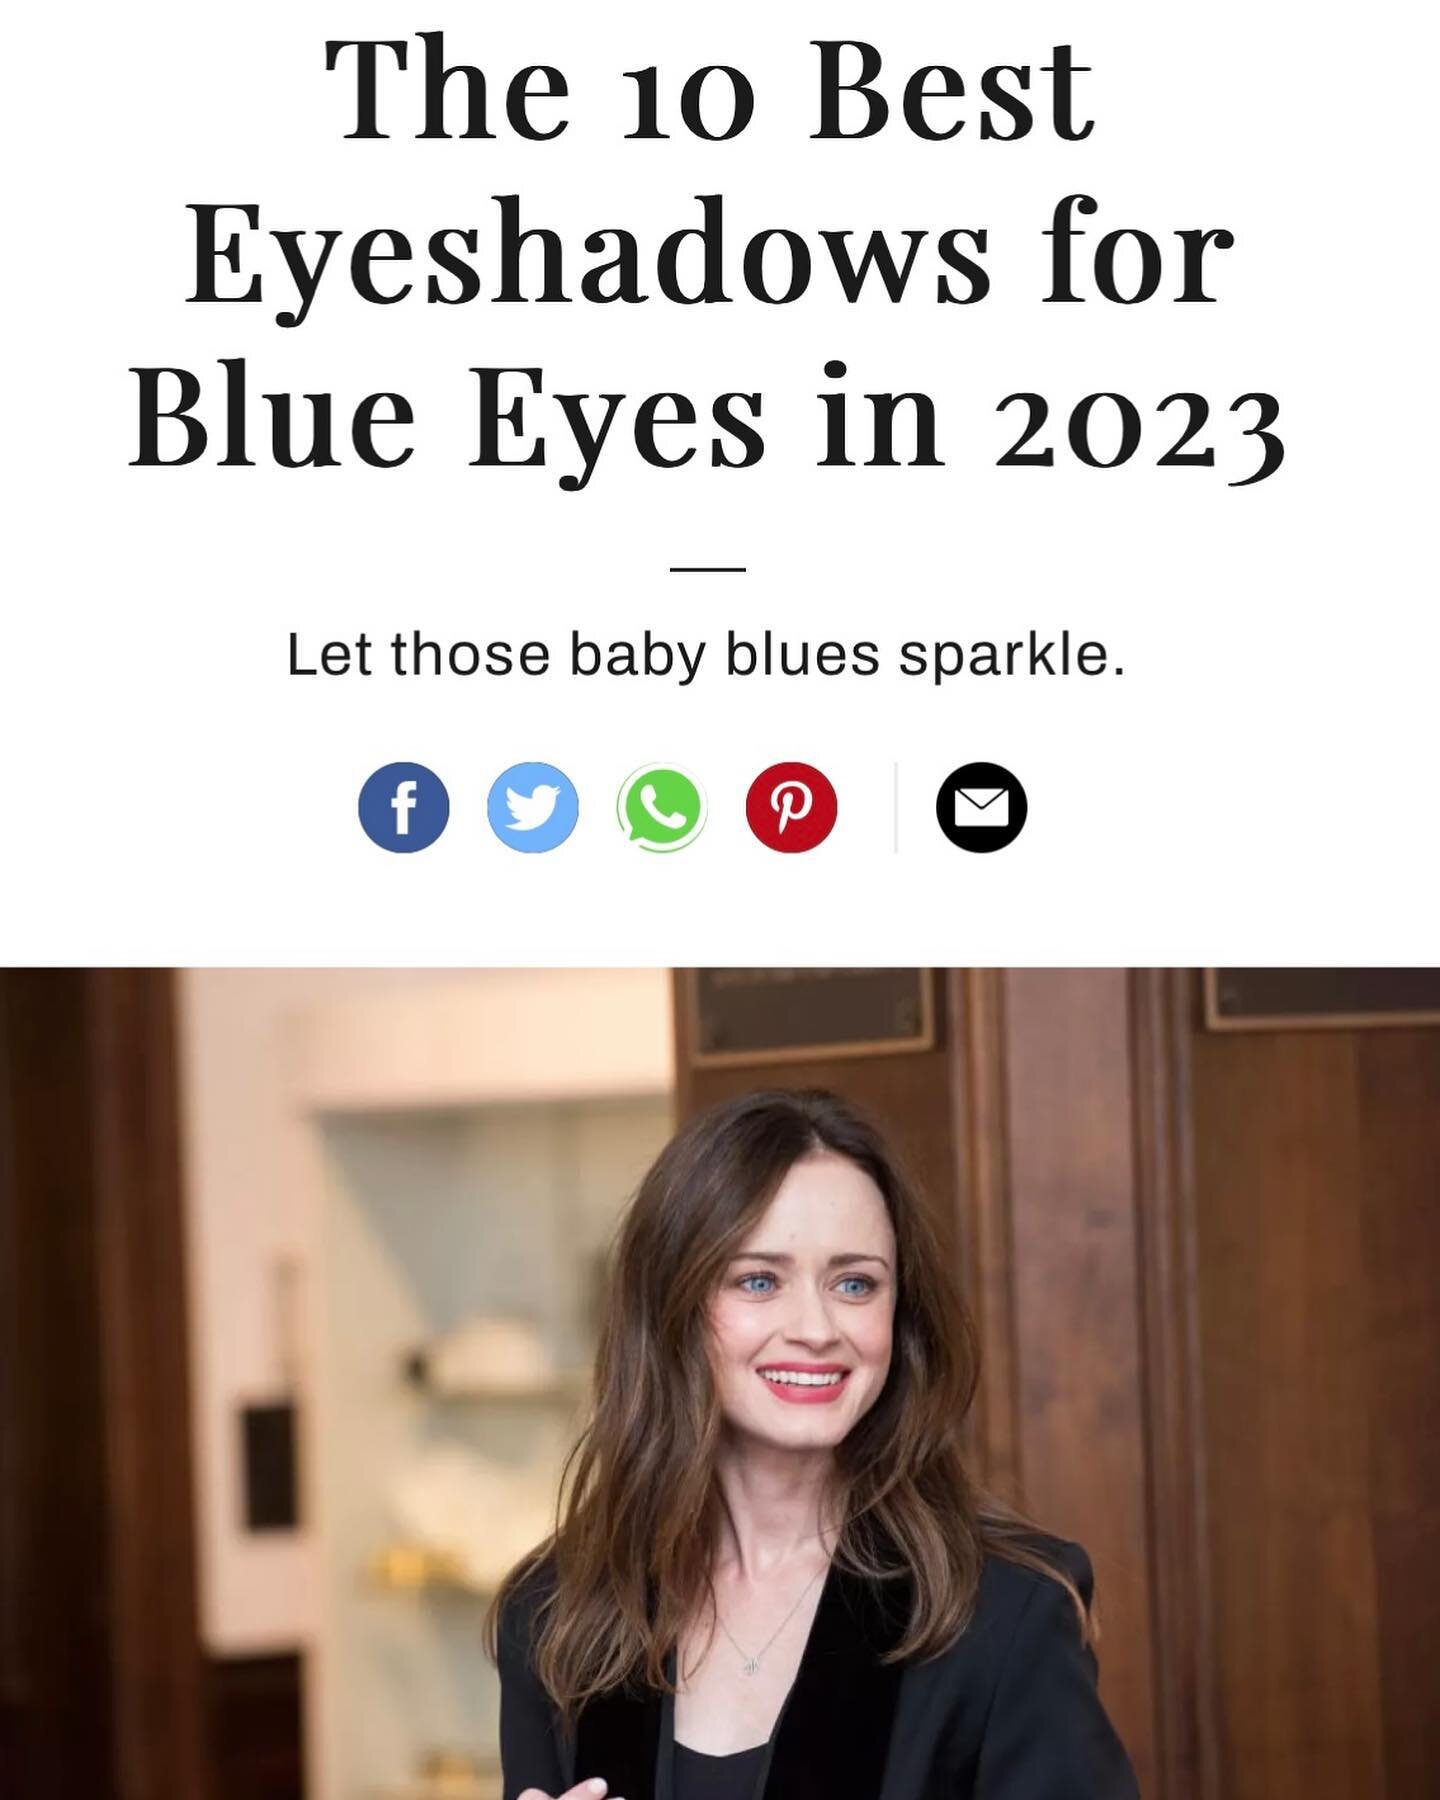 Thank you, @marieclairemag for this feature! Check out the full article written by @brooke_knapp by clicking the link in my PRESS story highlights. 
#marieclaire #besteyeshadows #makeupartist #blueeyesmakeup #blueeyes #protips #makeuptutorial #rmsbea